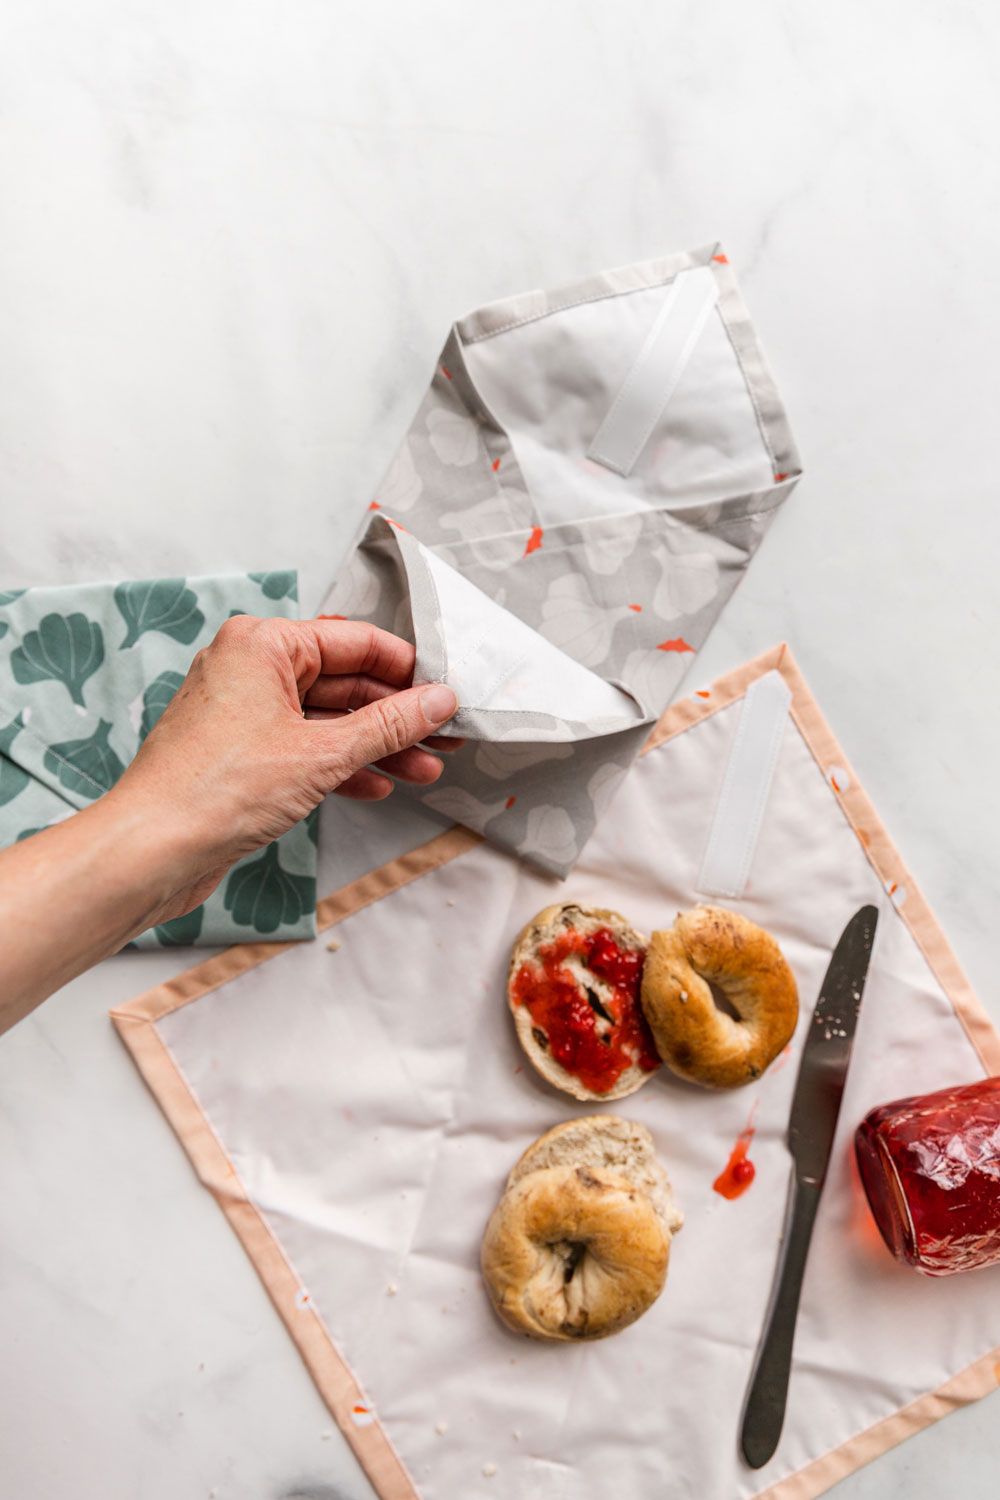 This DIY reusable sandwich wrap tutorial will help you become more green at home! A free scrap fabric pattern tutorial! suzyquilts.com #DIY #recyclefabric